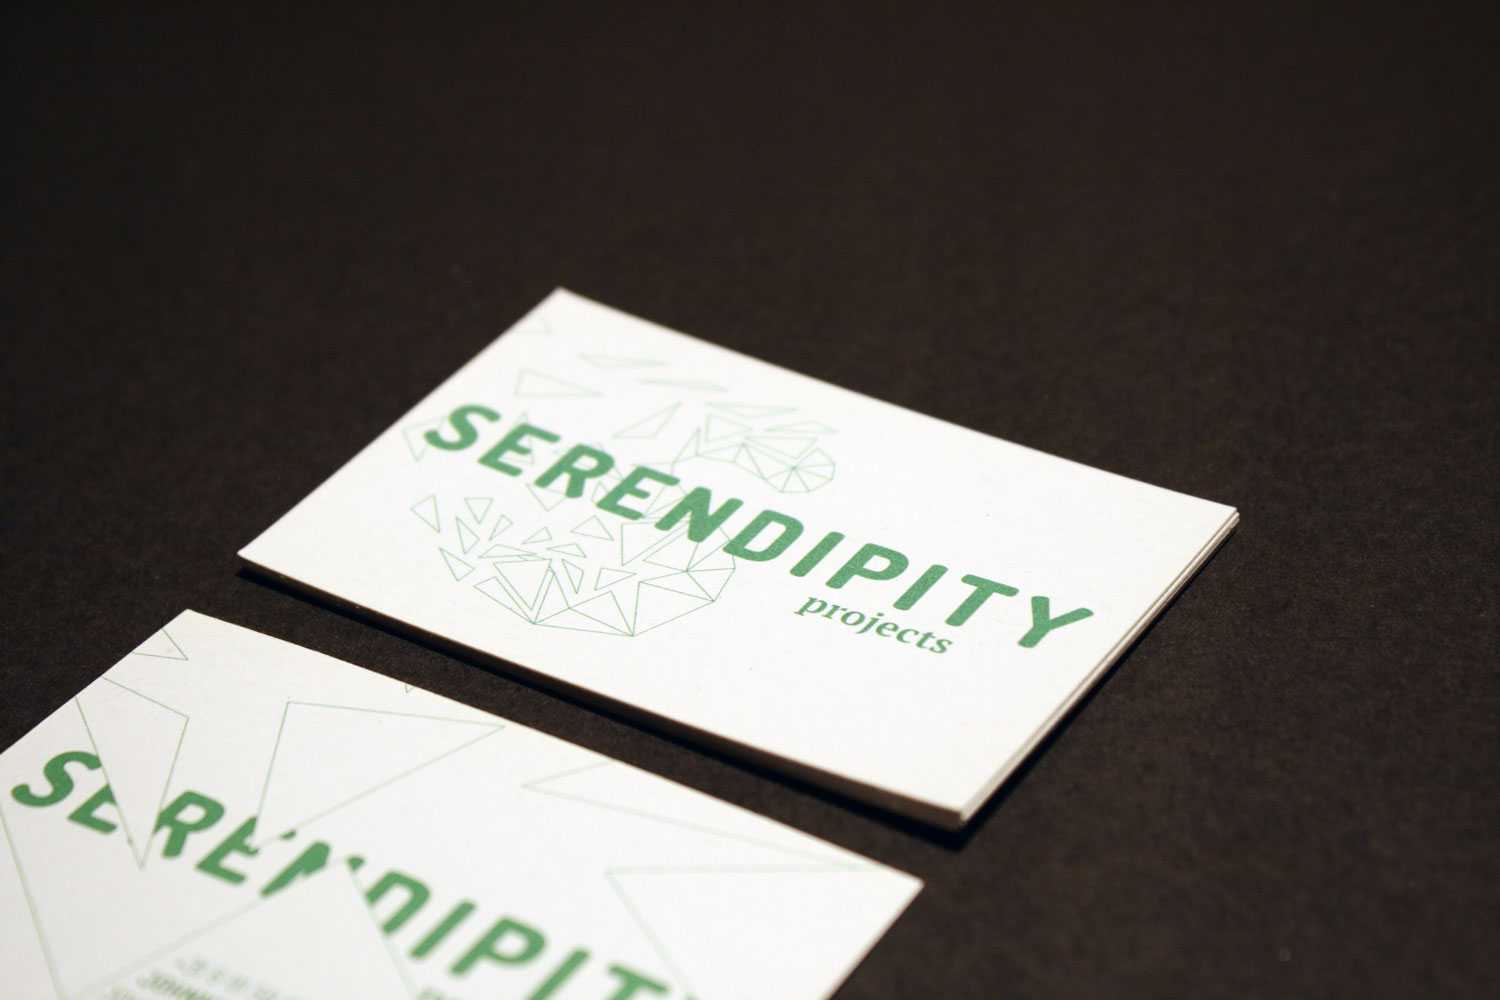 Image 2 of project 'Serendipity Projects'